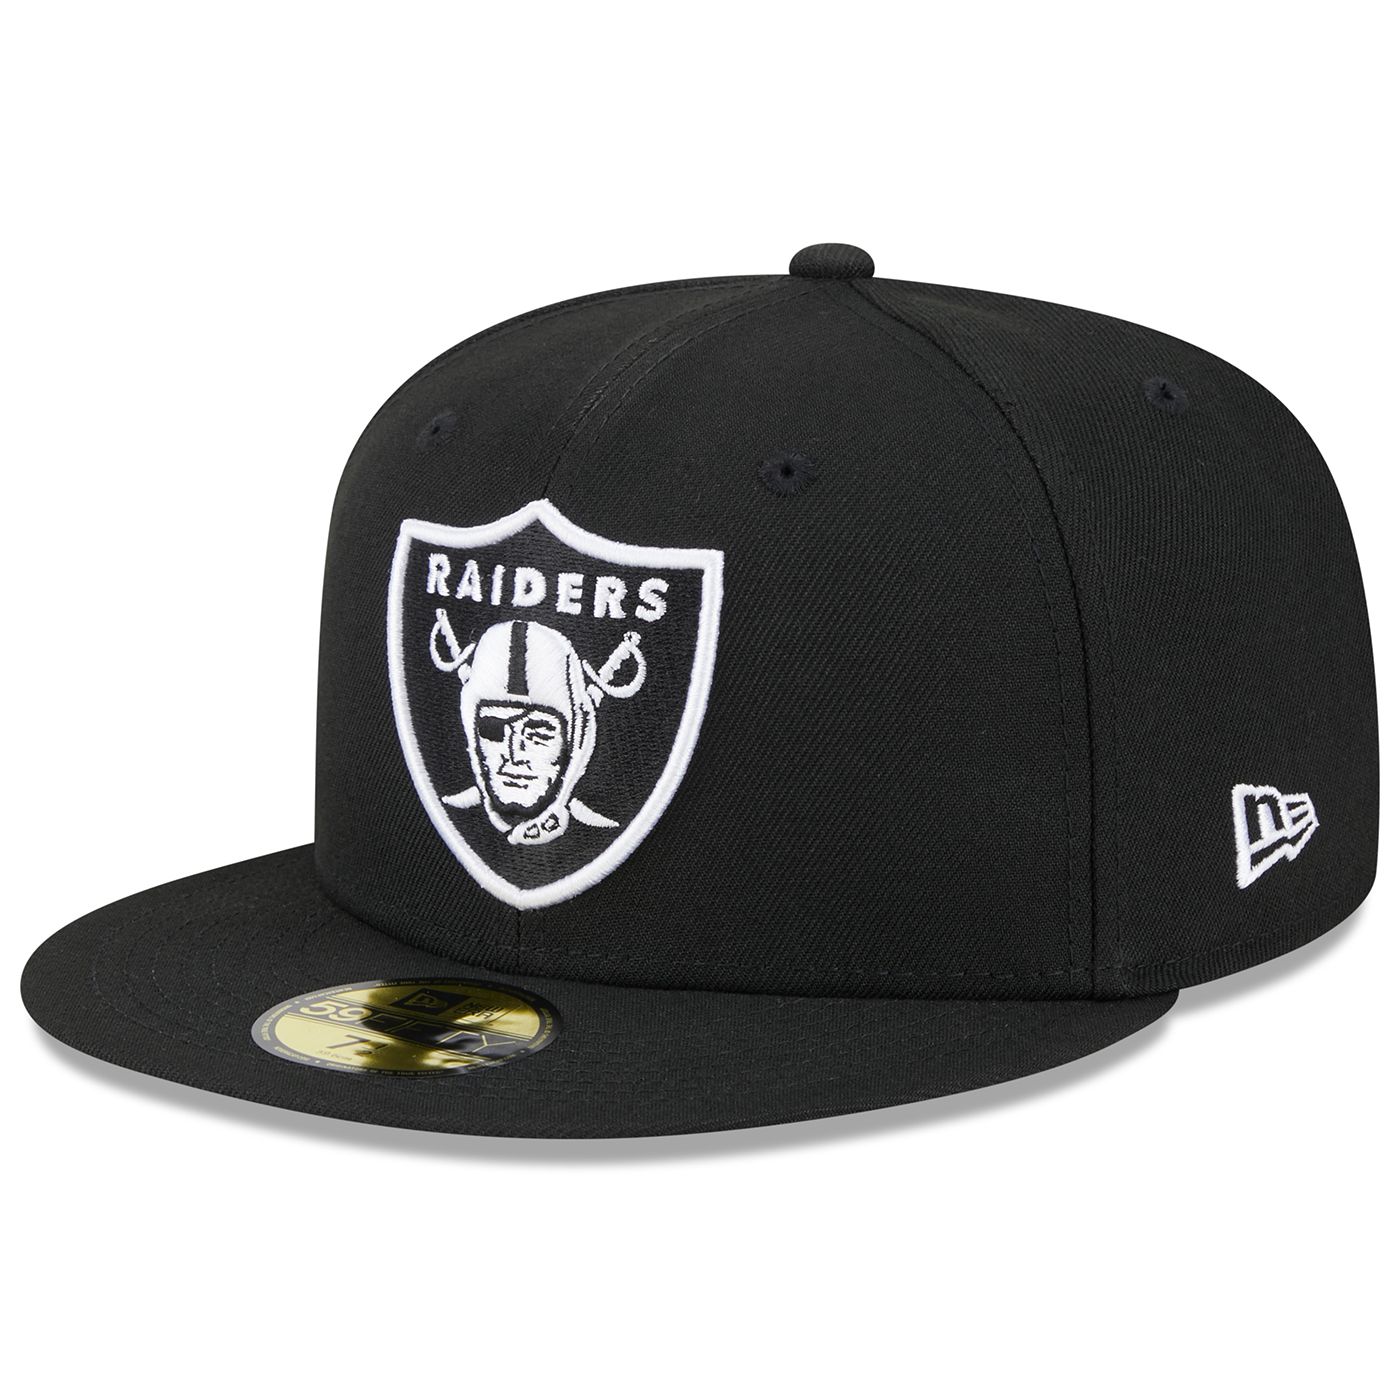 New Era - NFL Multi fitted Cap - Las Vegas Raiders 59FIFTY NFL Crucial Catch 22 Multi Fitted @ Hatstore